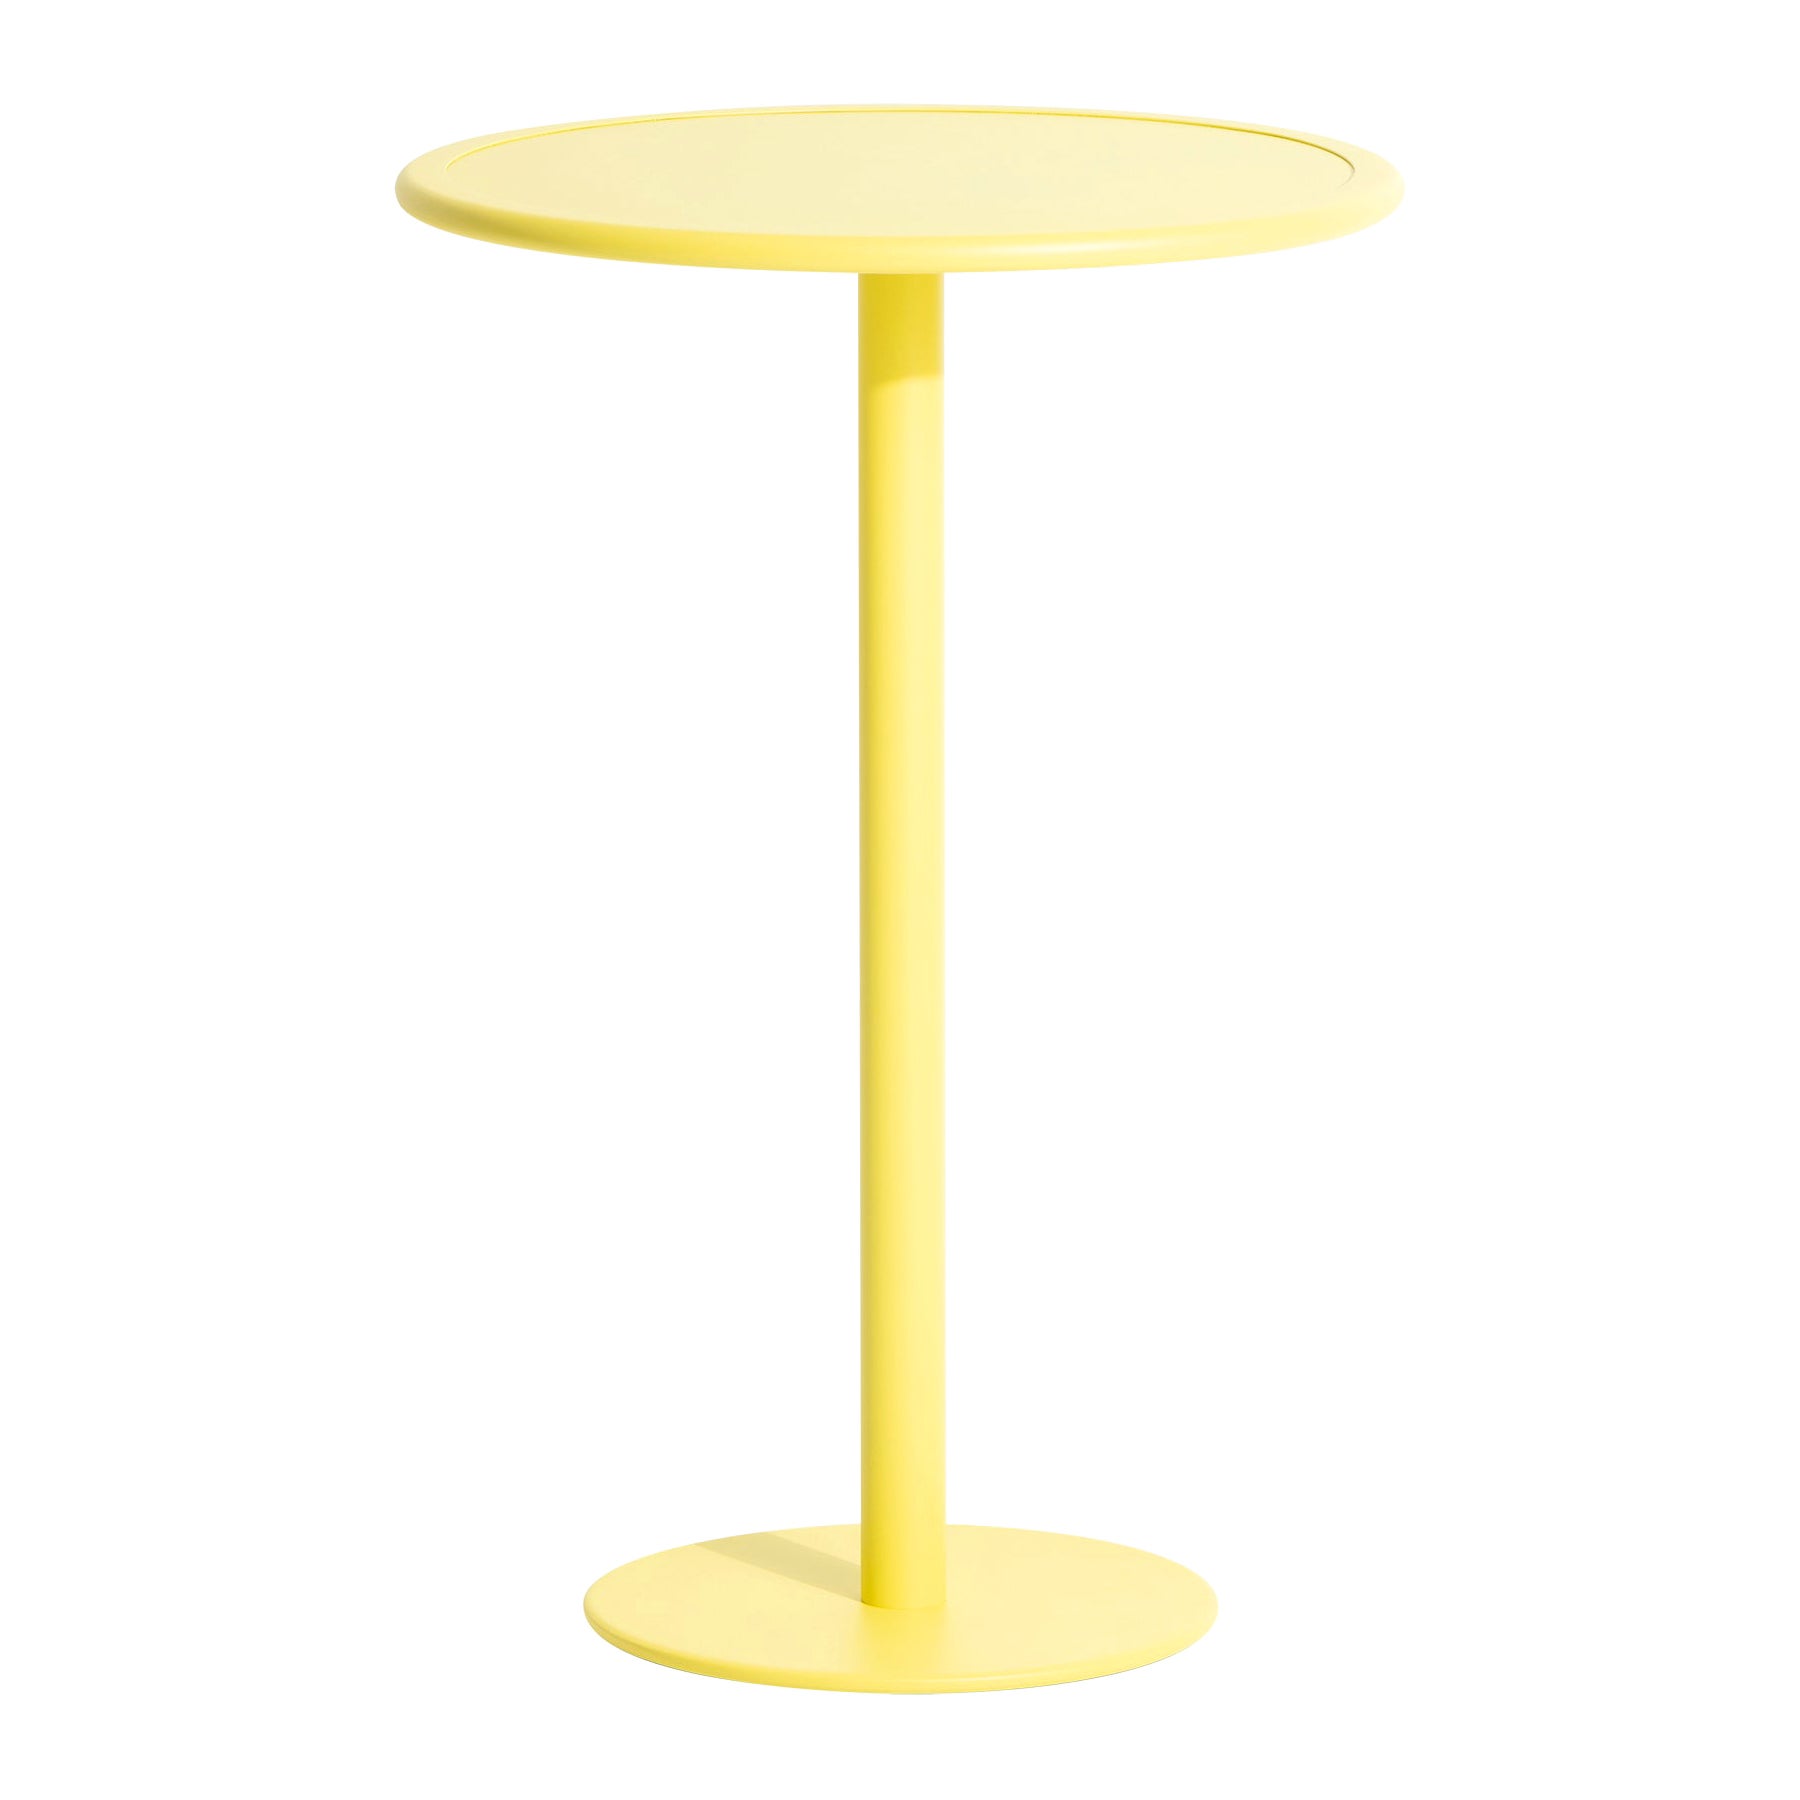 Petite Friture Week-End Round High Table in Yellow Aluminium, 2017 For Sale